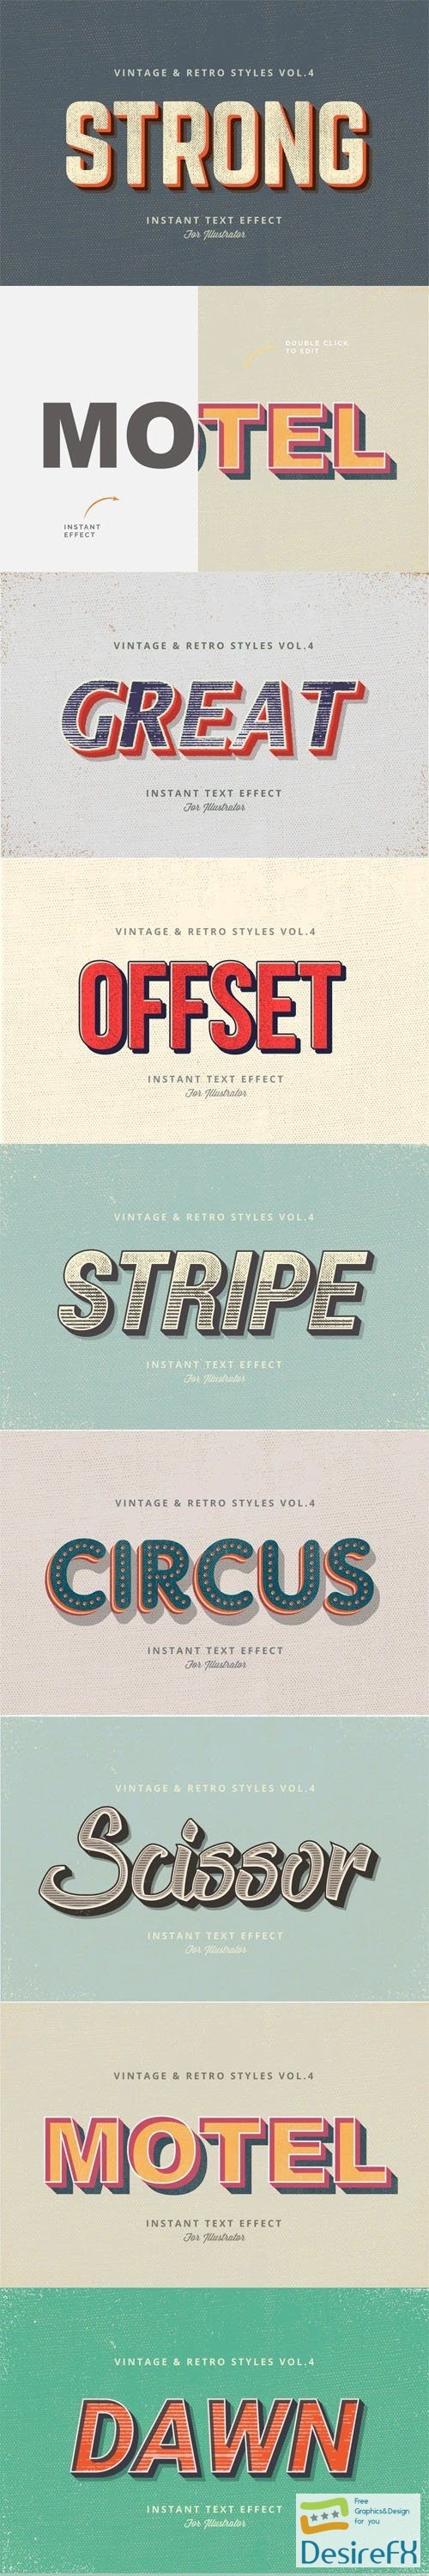 Vintage and Retro Graphic Styles Vol.4 for Adobe Illustrator